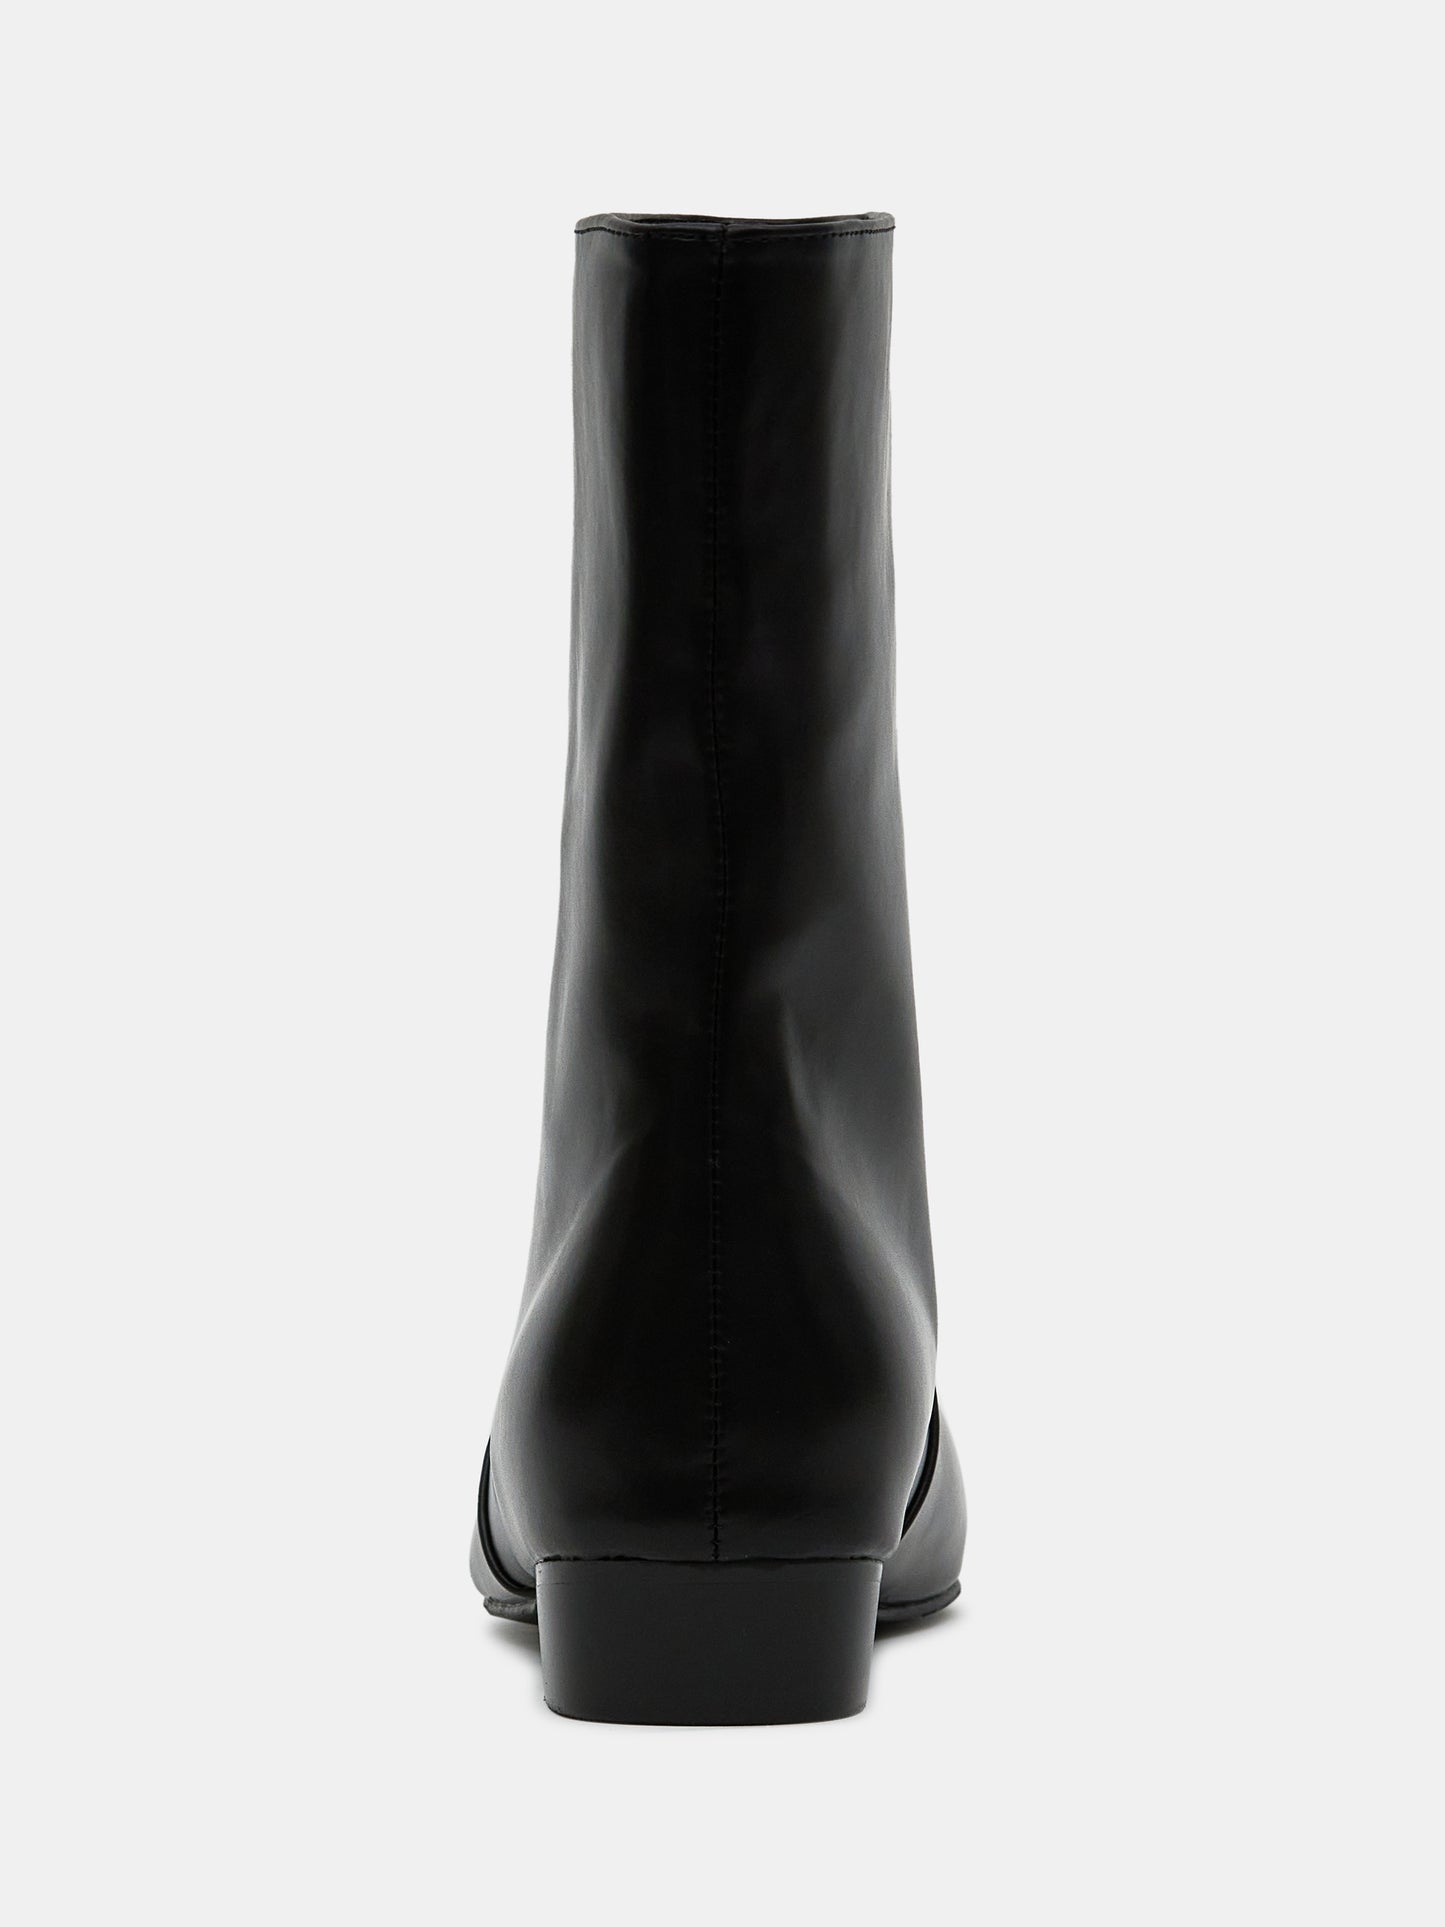 Pointed Mid Calf Boots, Black